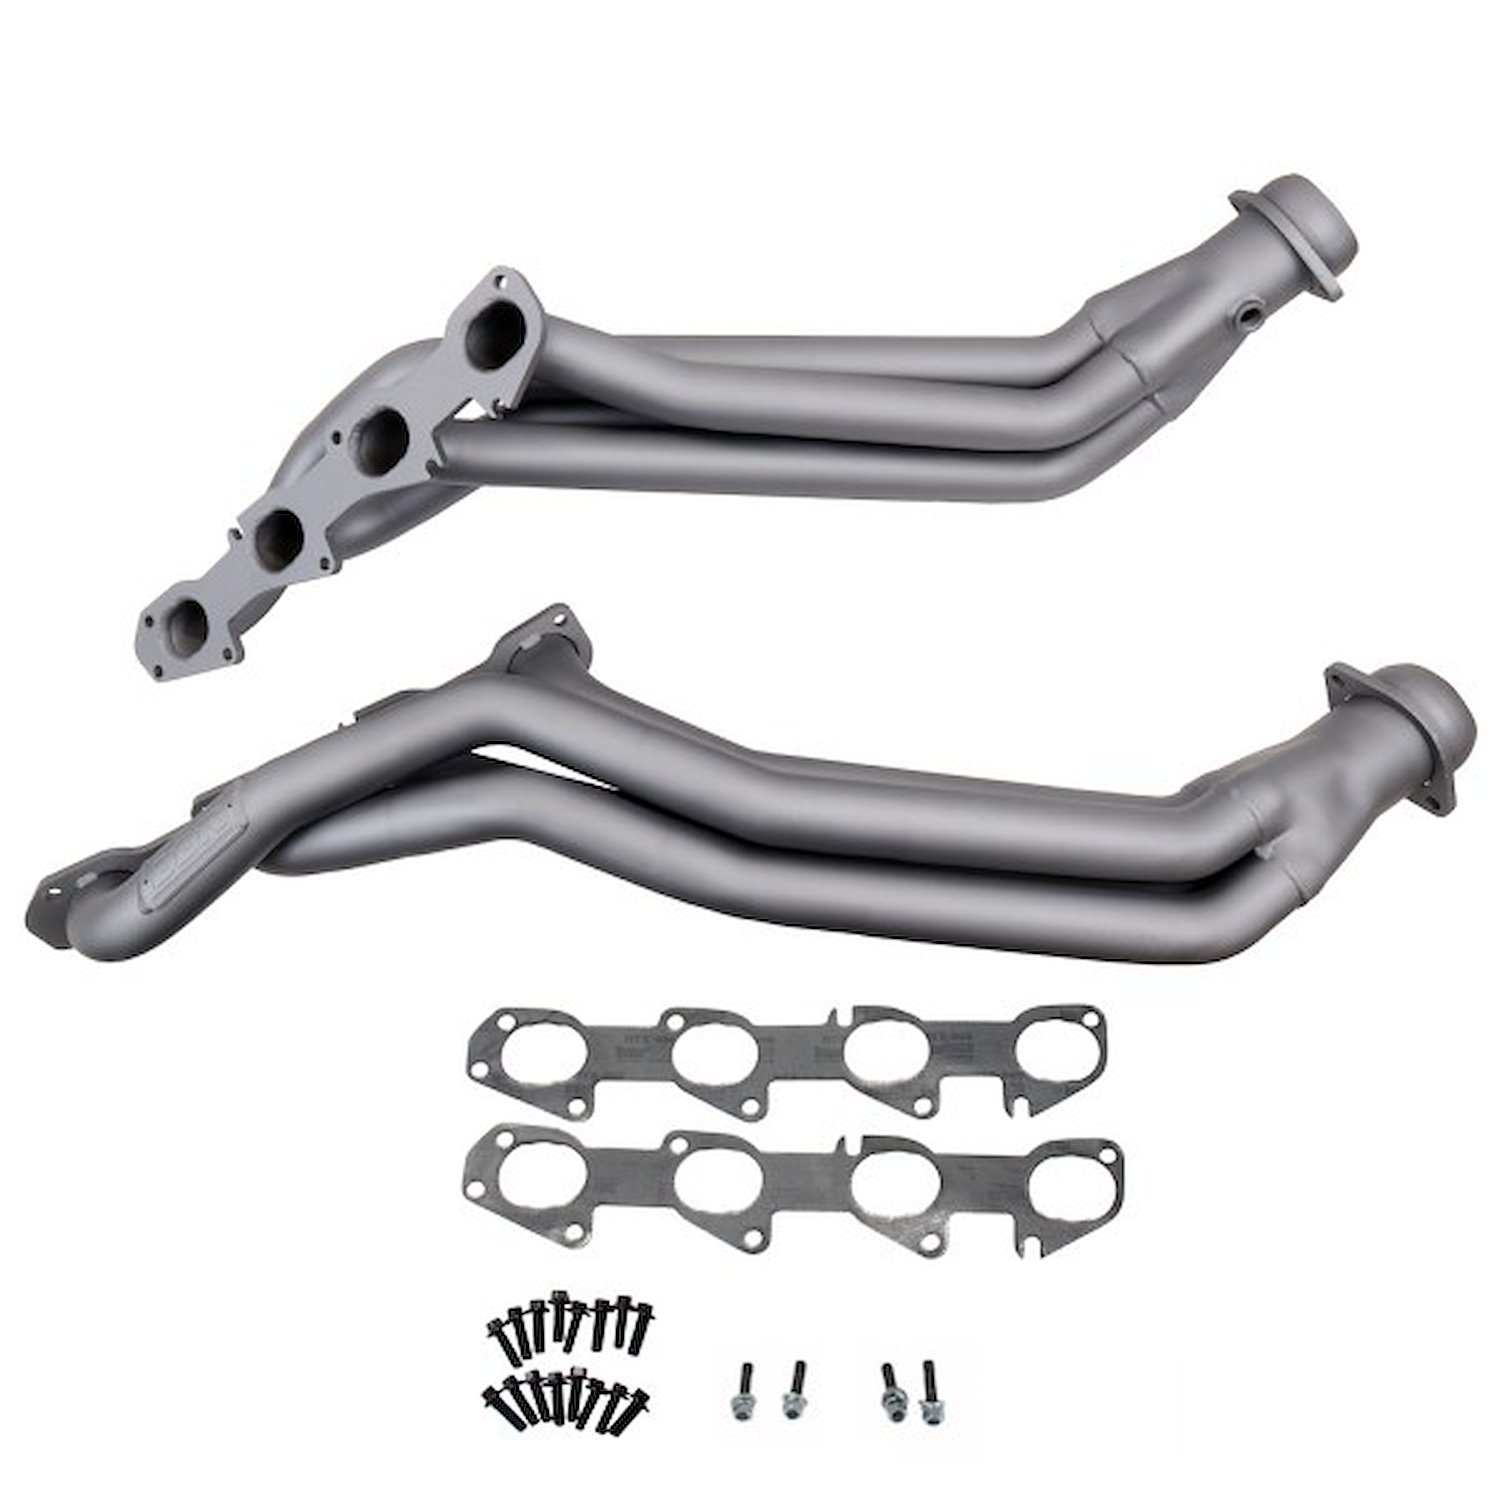 Full-Length Exhaust Headers Fits Select Dodge Charger,